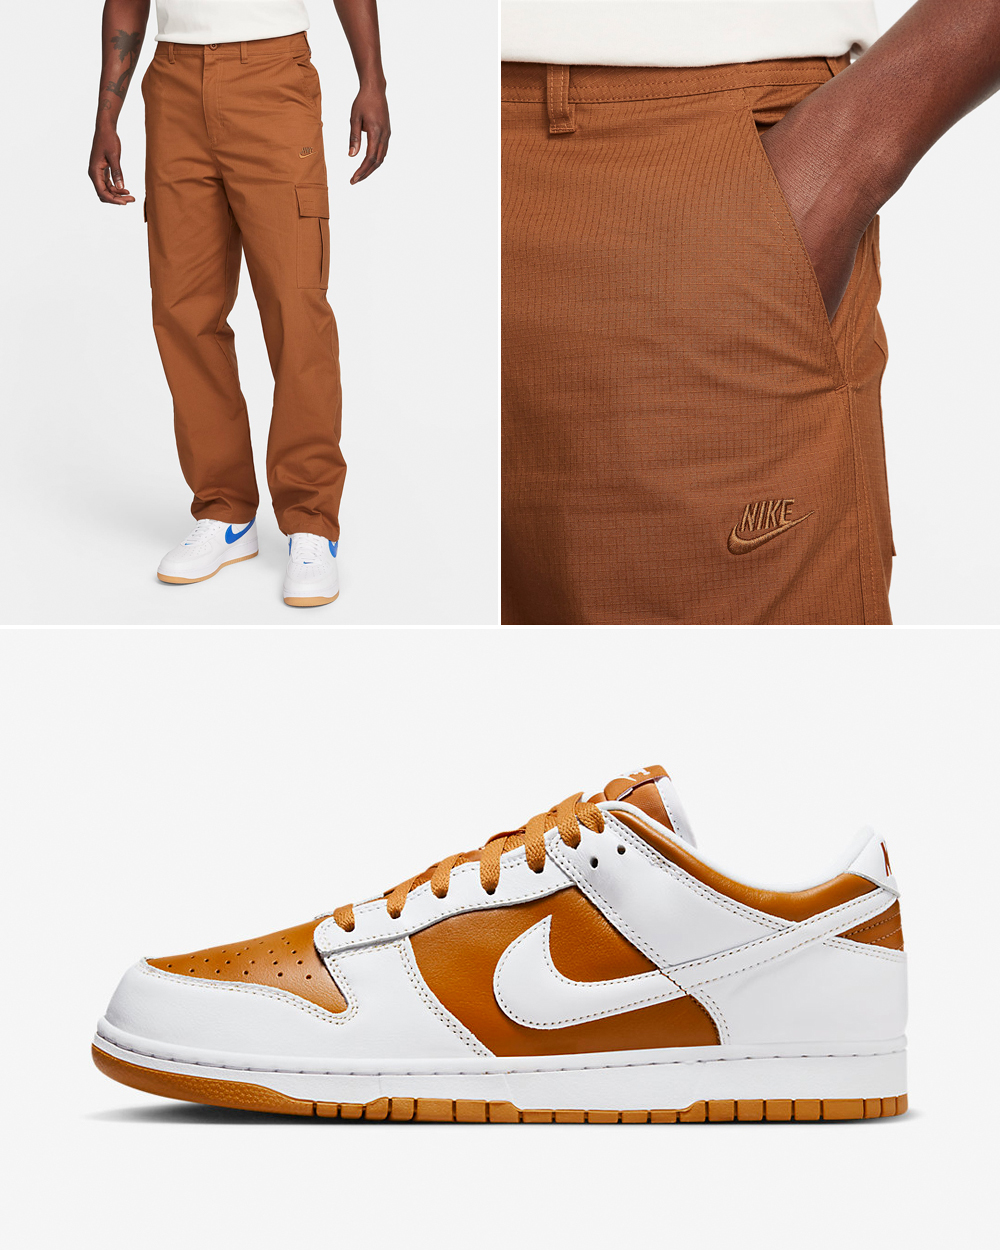 Nike-Dunk-Low-Reverse-Curry-Cargo-Pants